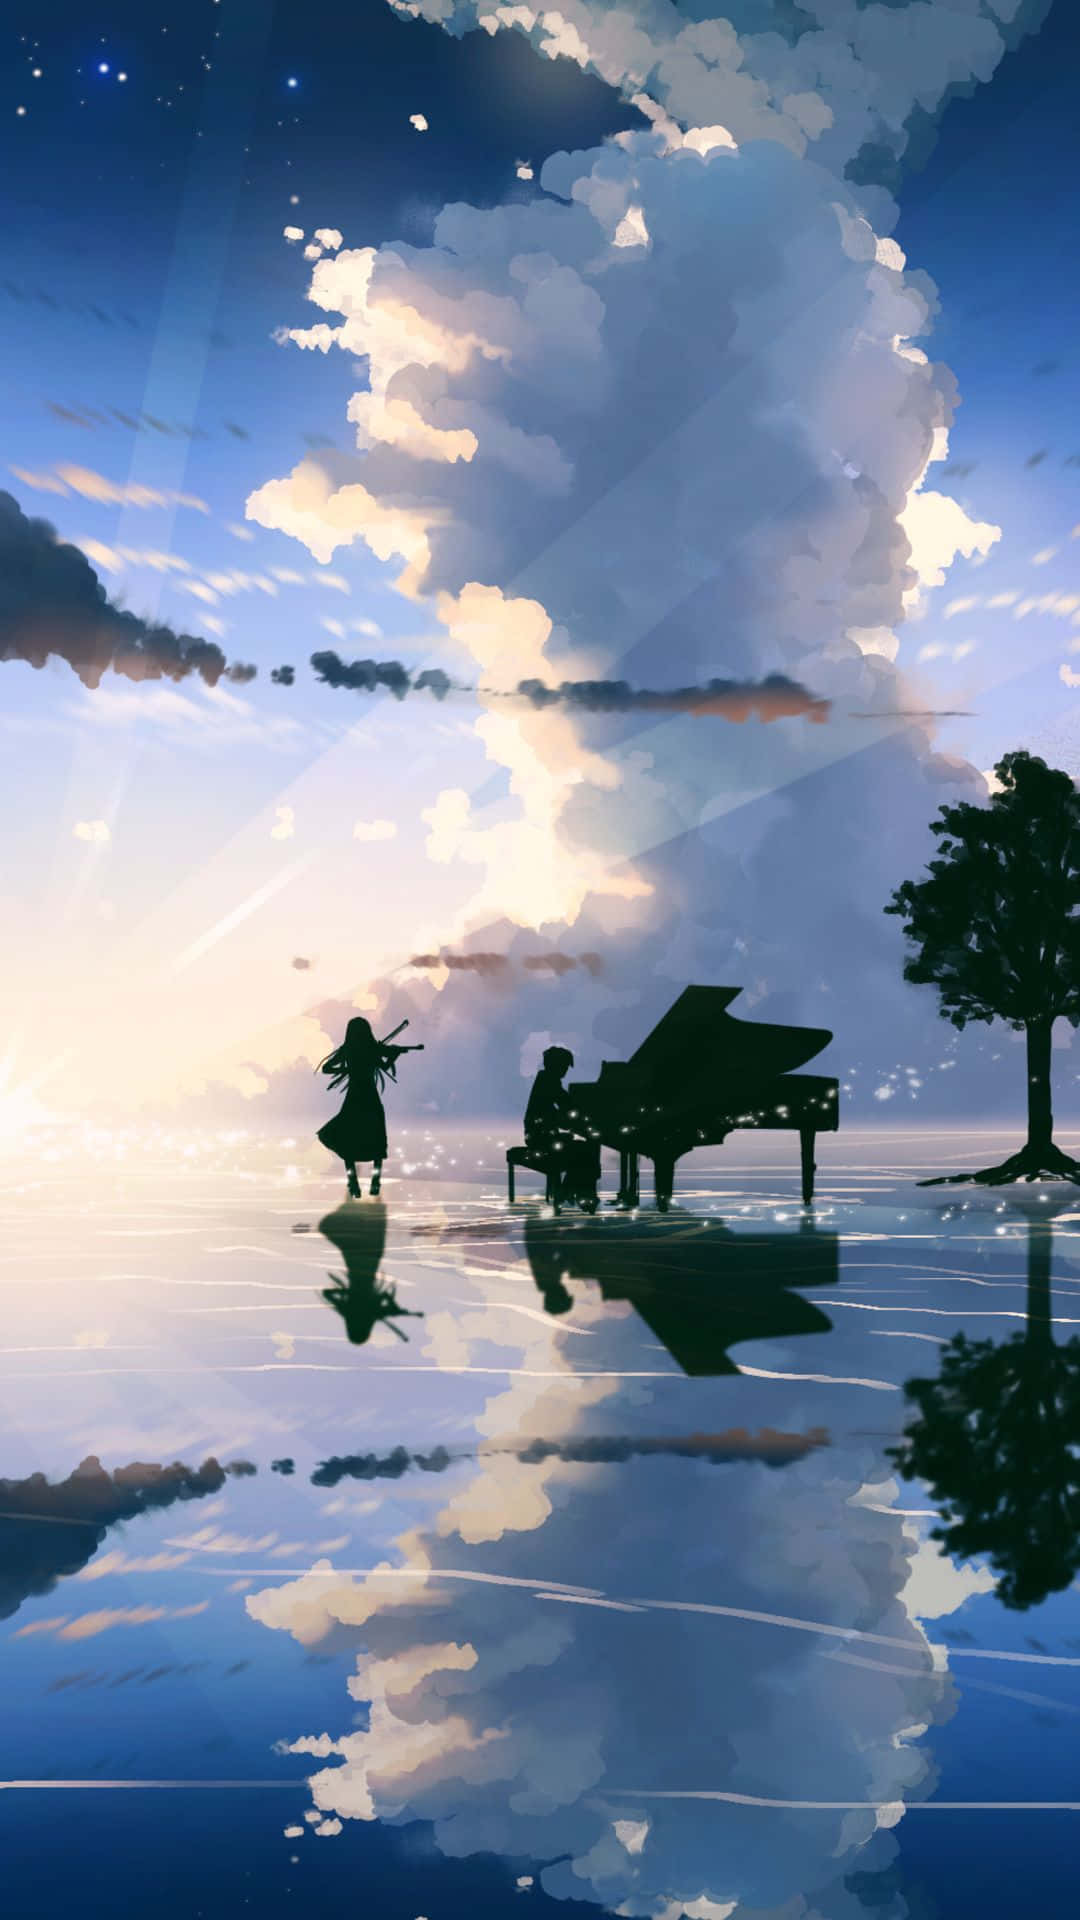 Your Lie In April Iphone Kaori Violin Silhouette Pictures Wallpaper